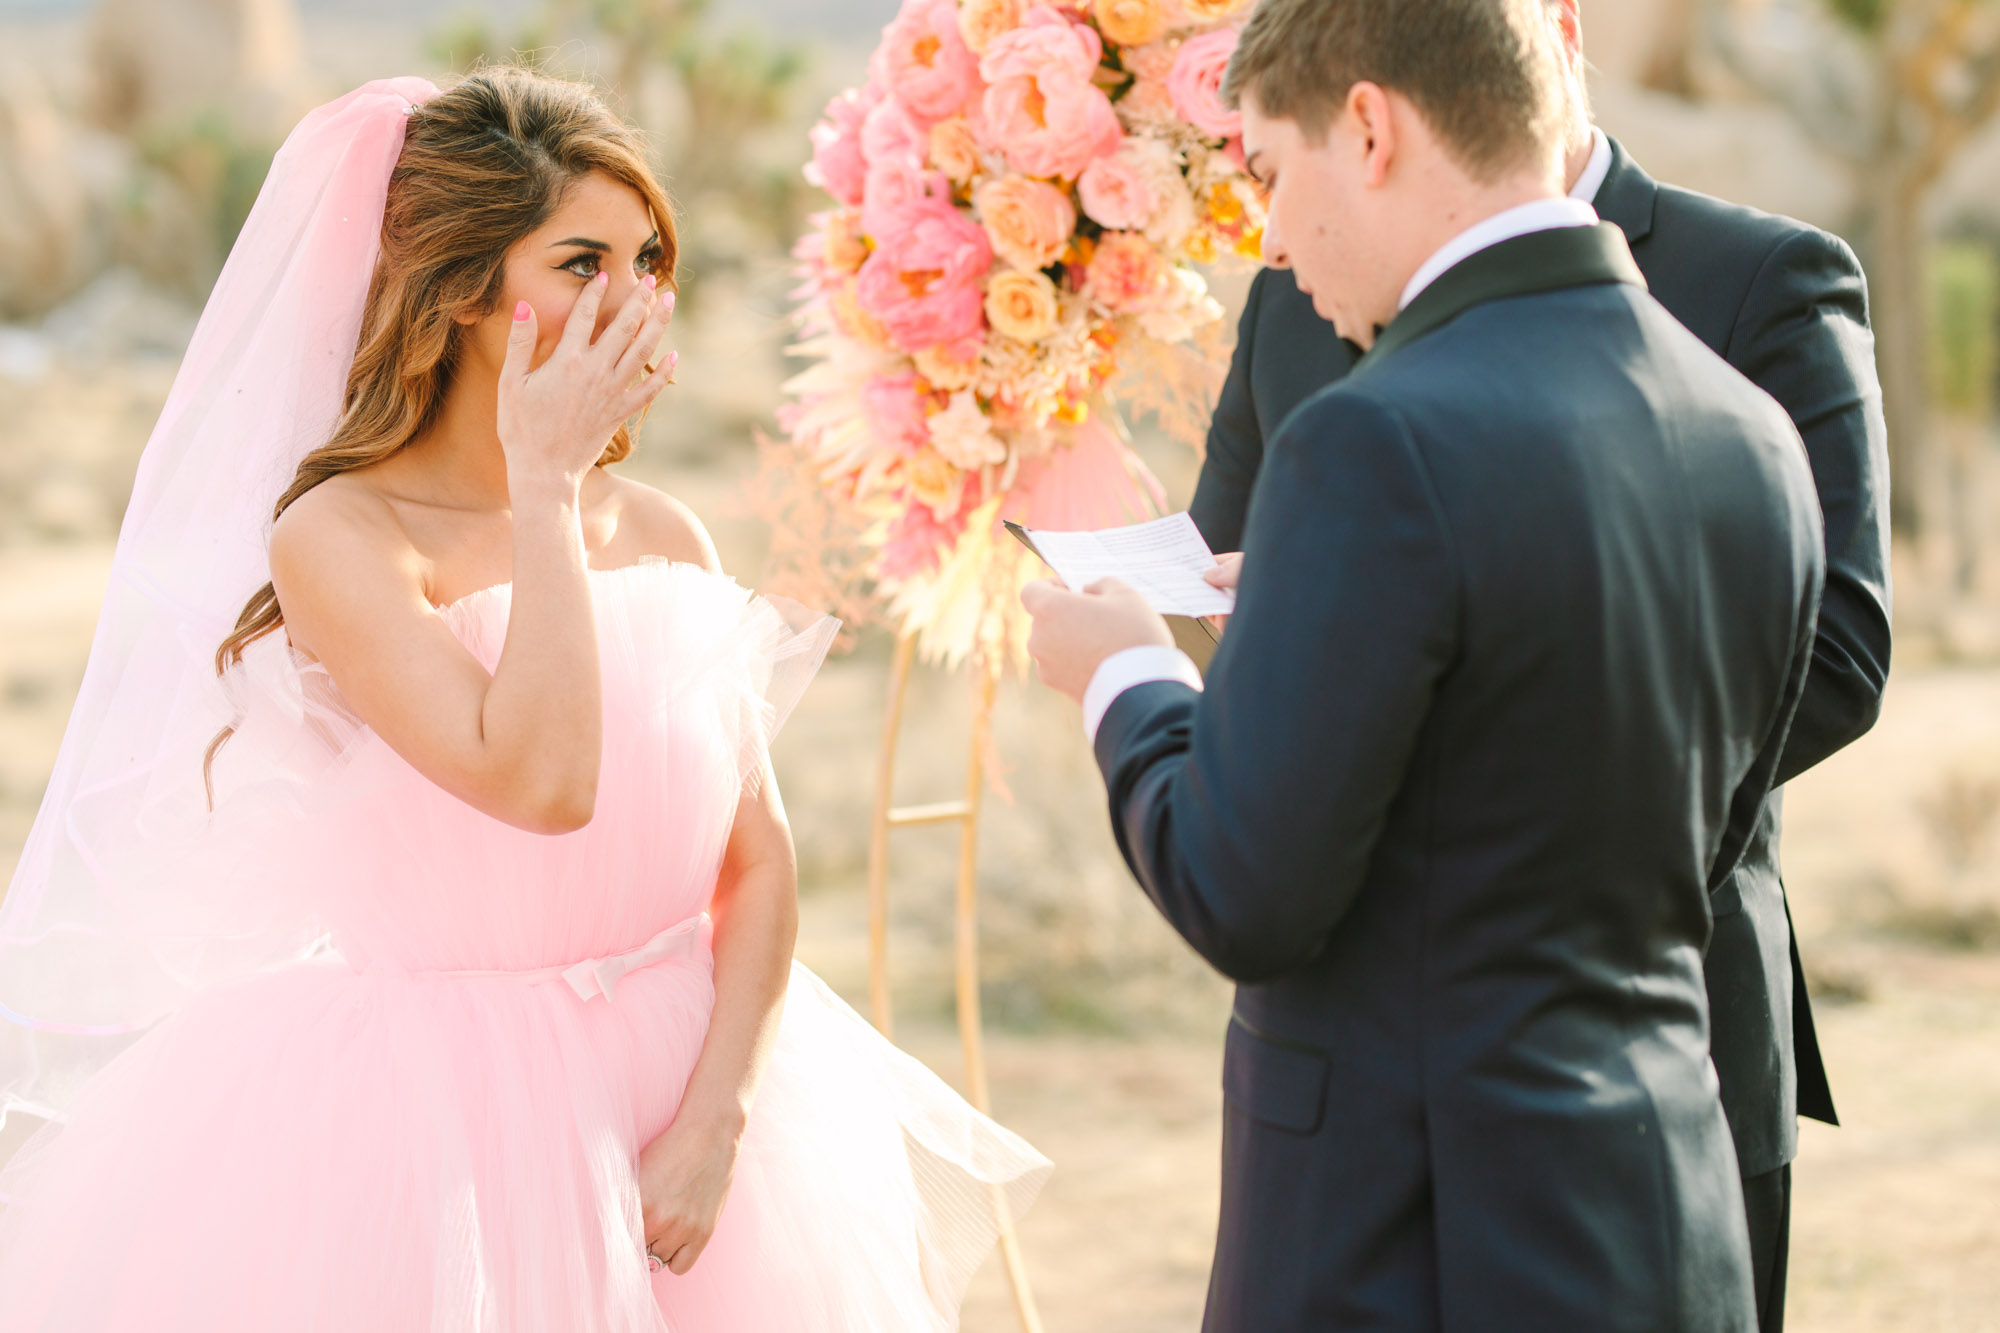 Bride wiping away tear | Pink wedding dress Joshua Tree elopement featured on Green Wedding Shoes | Colorful desert wedding inspiration for fun-loving couples in Southern California #joshuatreewedding #joshuatreeelopement #pinkwedding #greenweddingshoes Source: Mary Costa Photography | Los Angeles